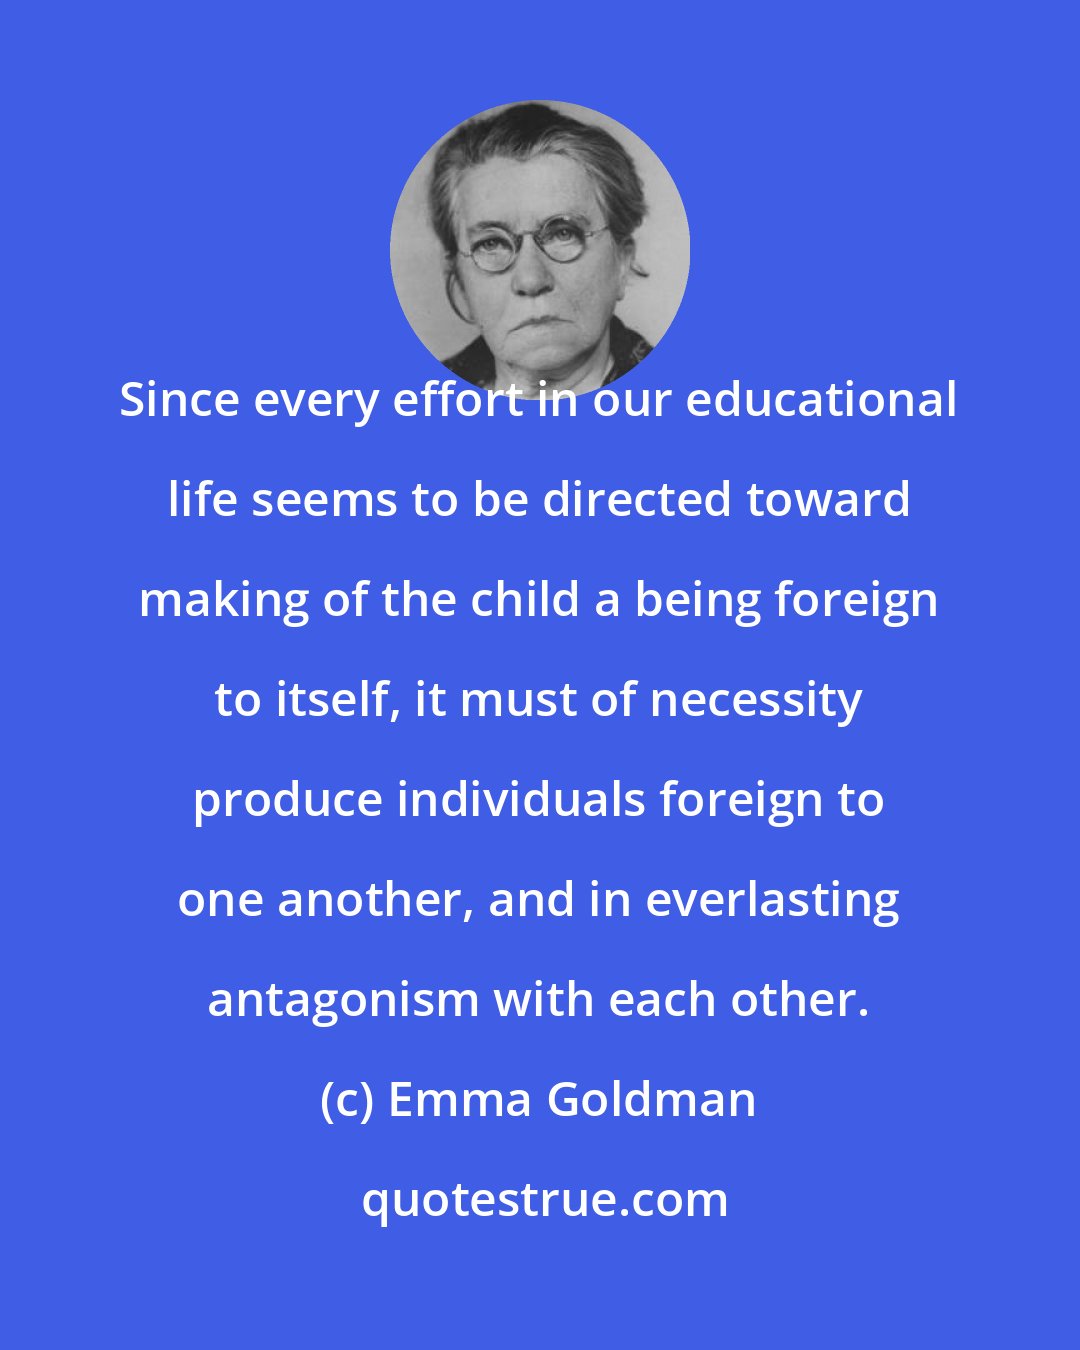 Emma Goldman: Since every effort in our educational life seems to be directed toward making of the child a being foreign to itself, it must of necessity produce individuals foreign to one another, and in everlasting antagonism with each other.